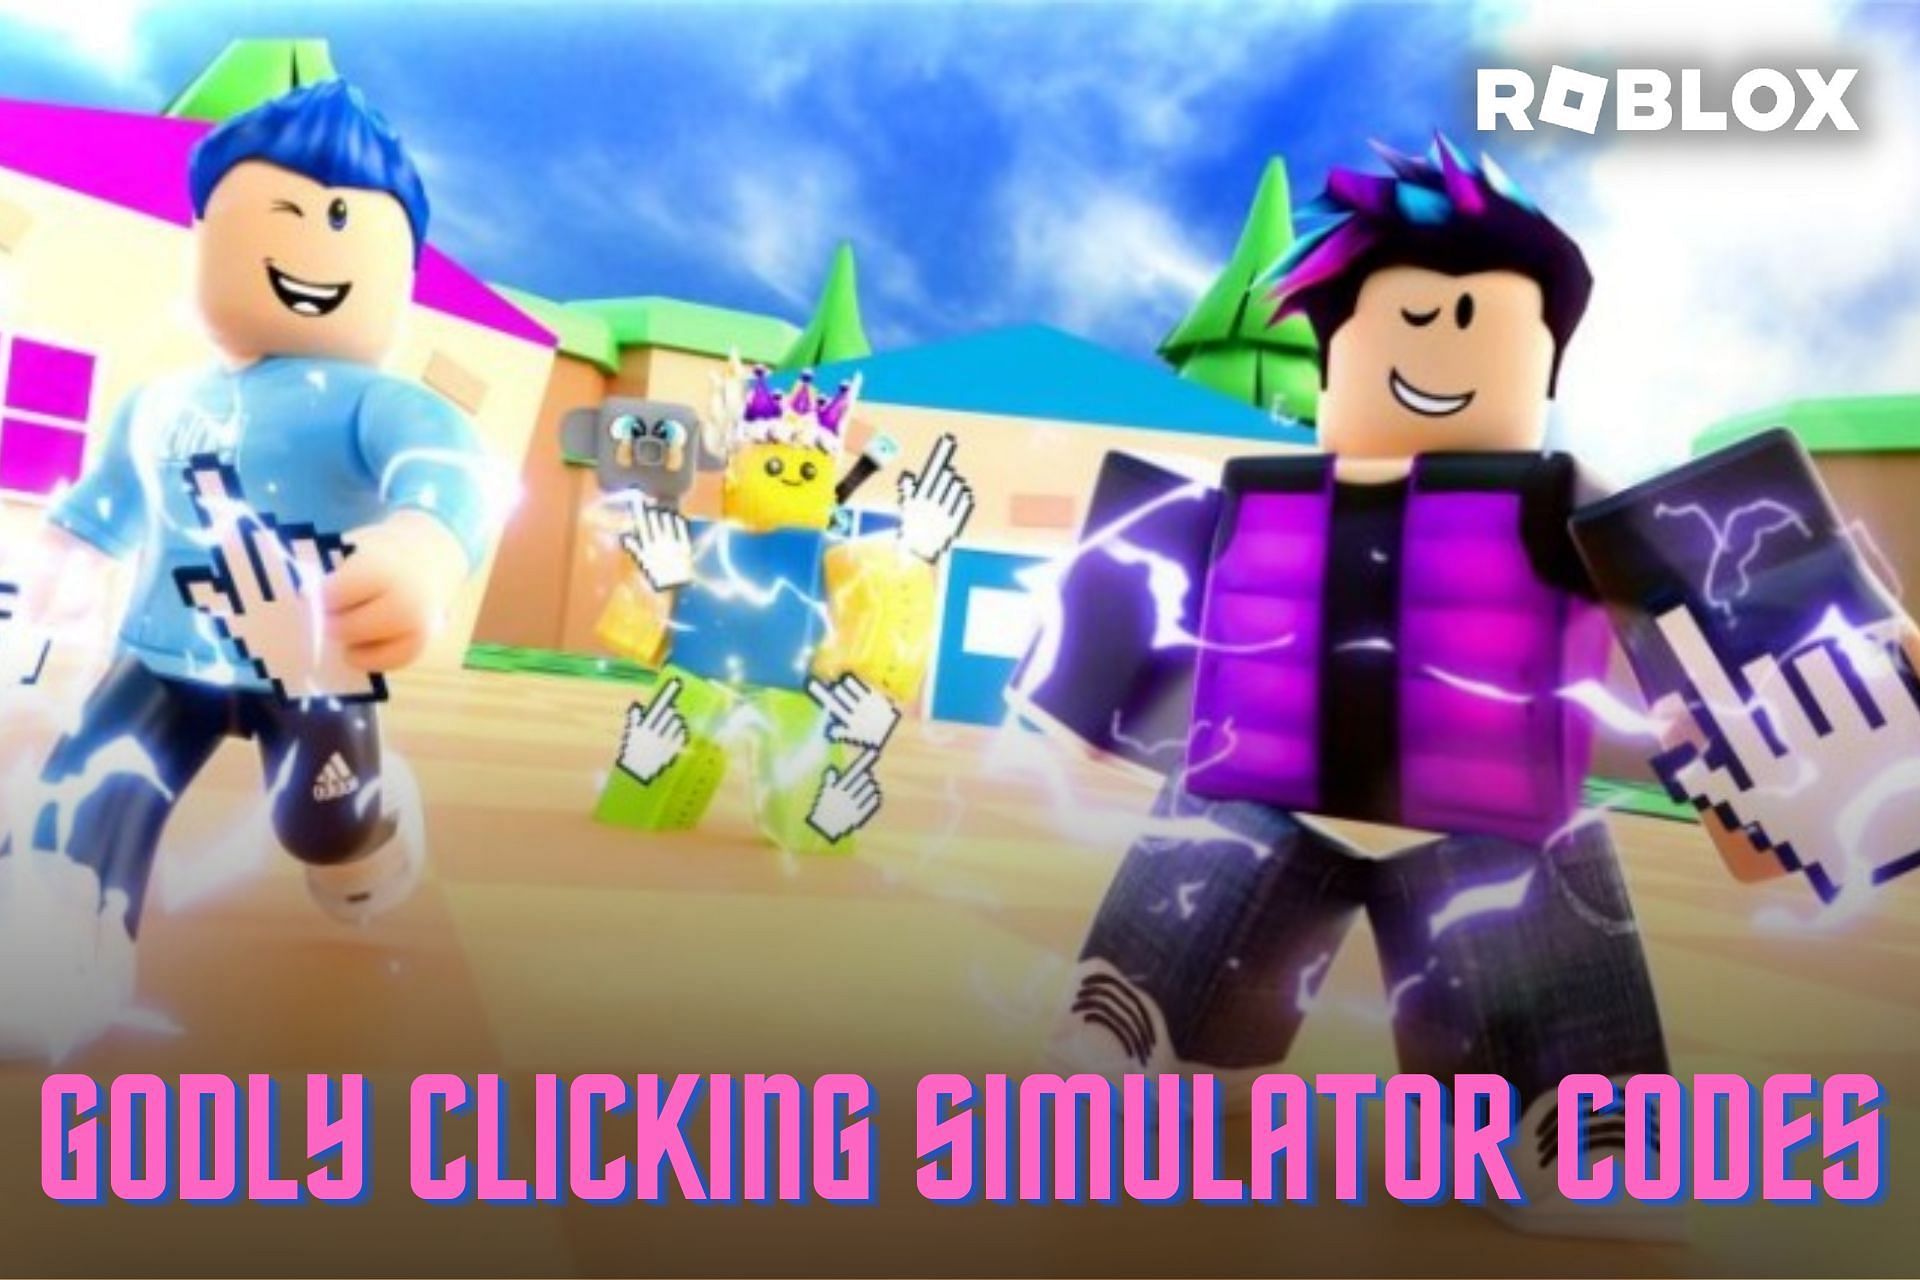 Roblox Pet Simulator X codes for December 2022: Inactive codes, usage, and  more